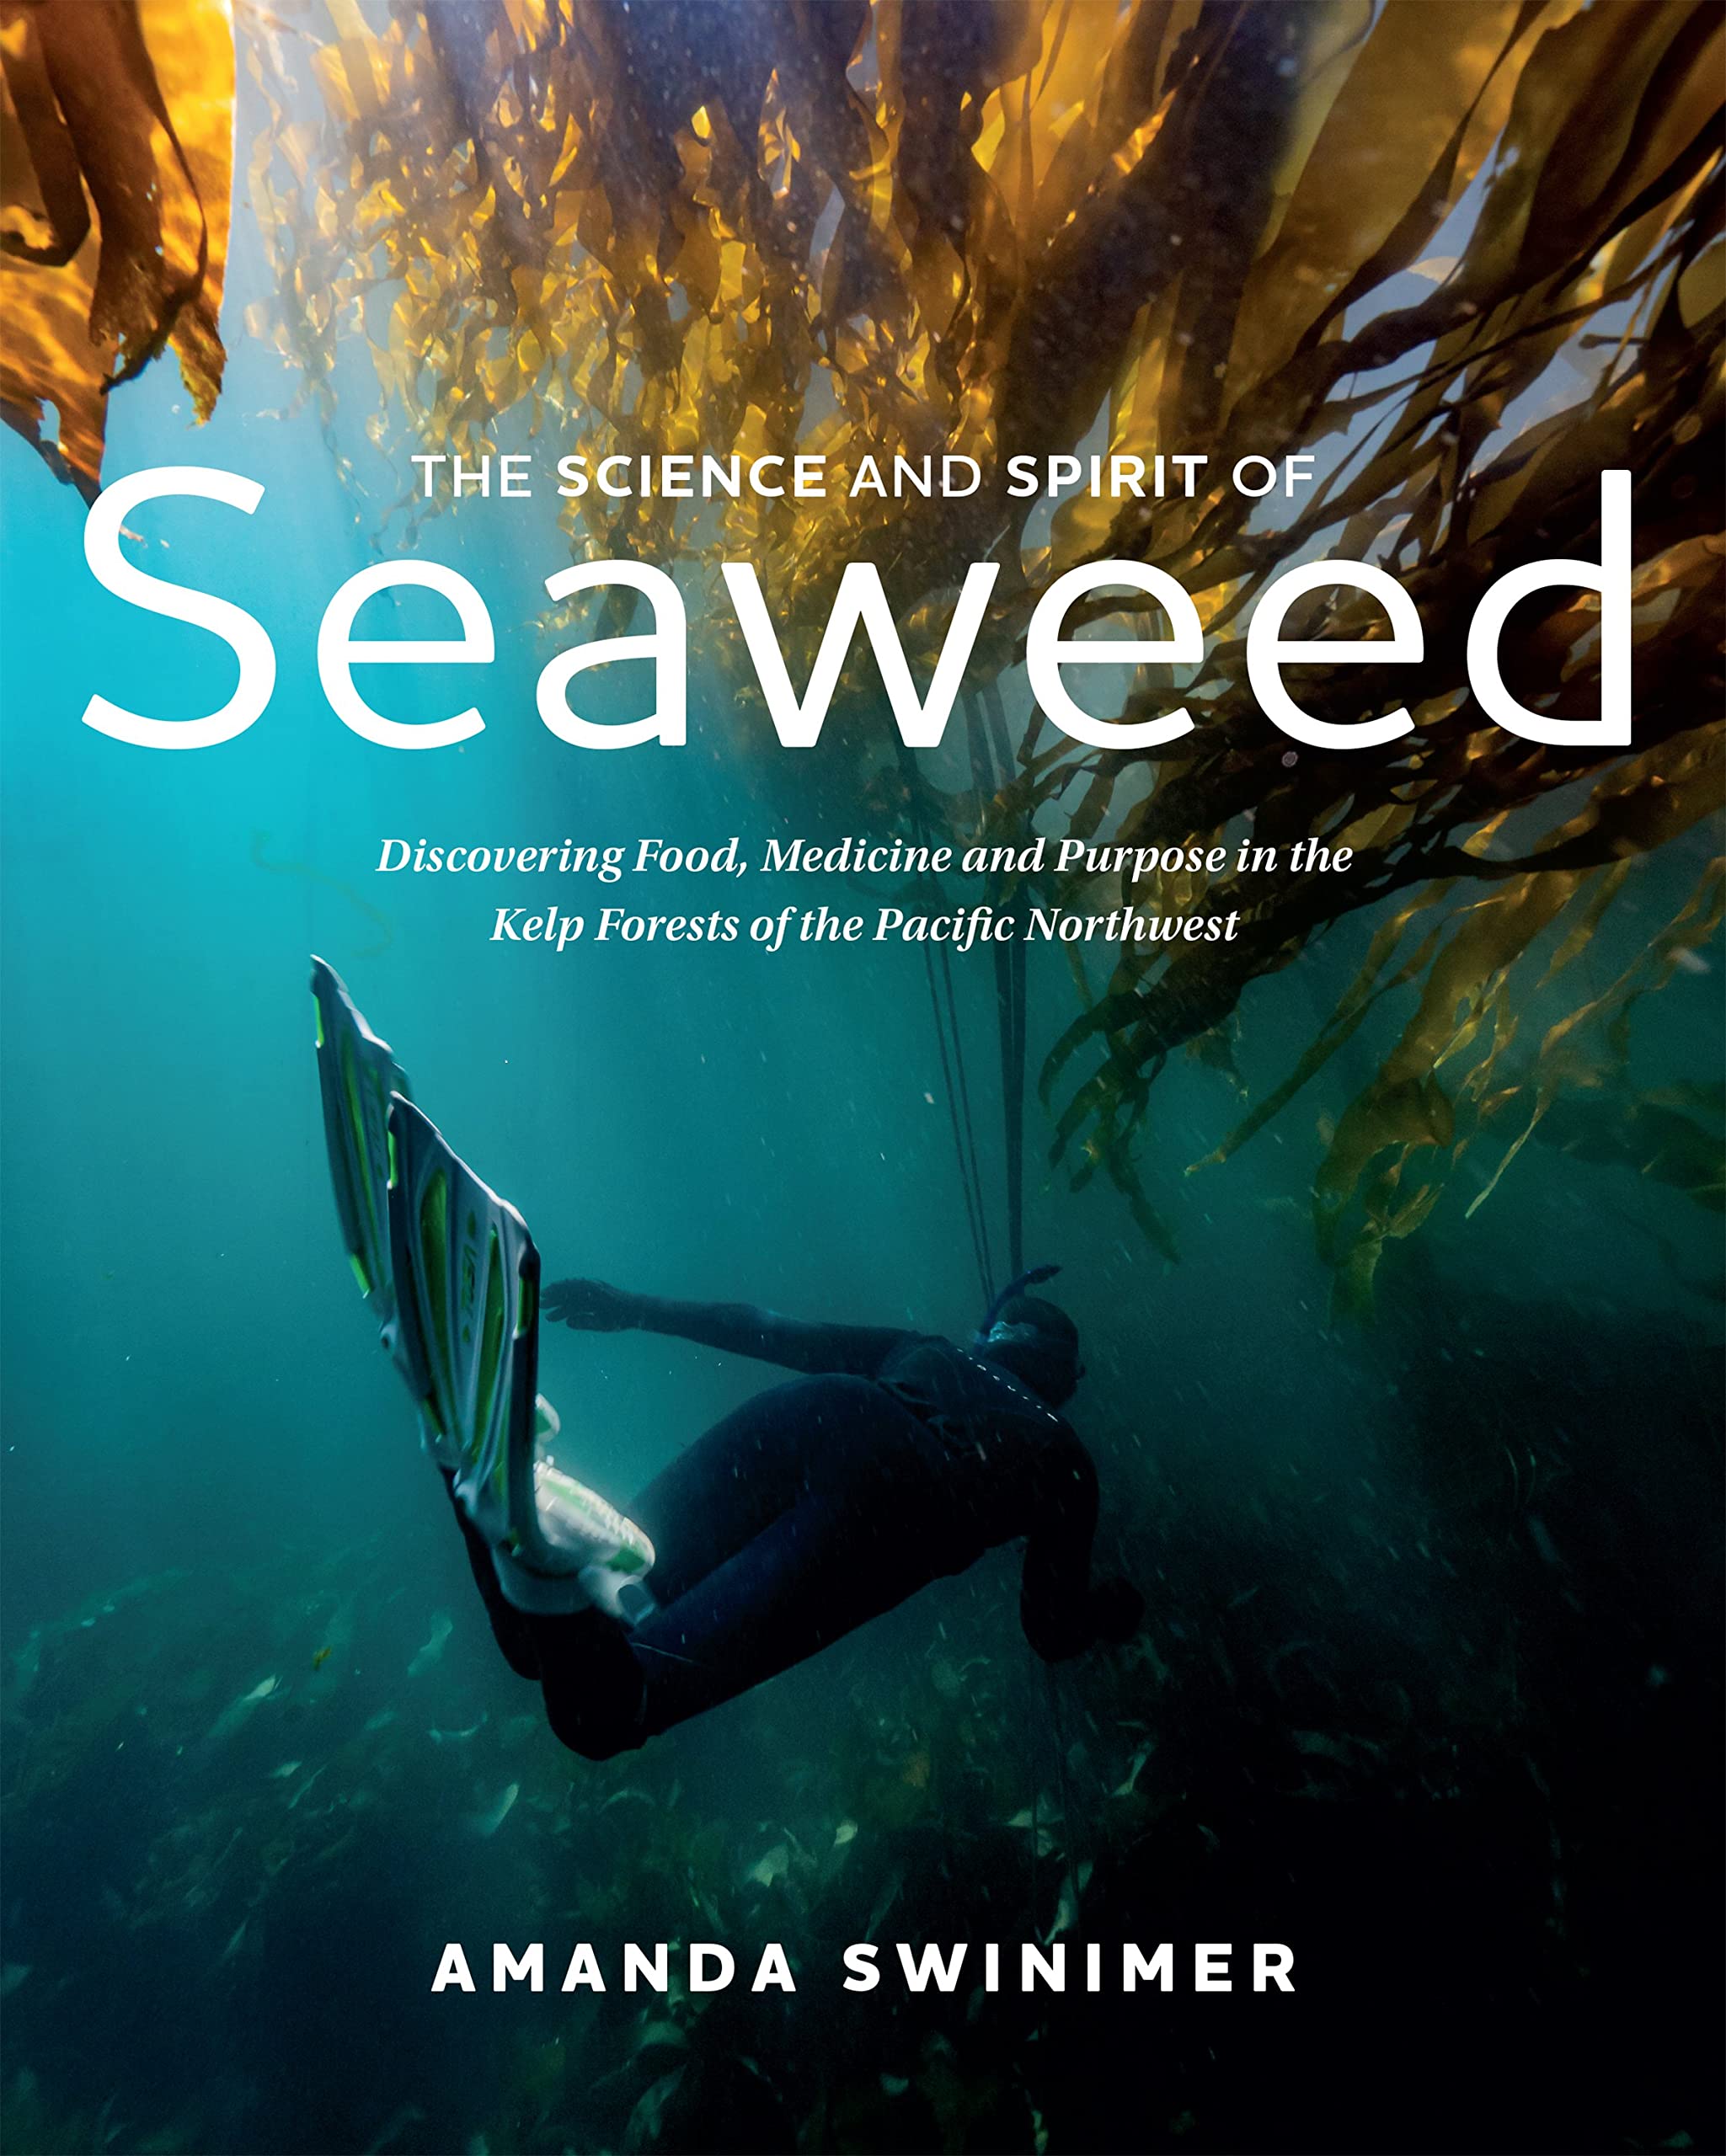 The Science and Spirit of Seaweed: Discovering Food, Medicine and Purpose in the Kelp Forests of the Pacific Northwest (Amanda Swinimer)